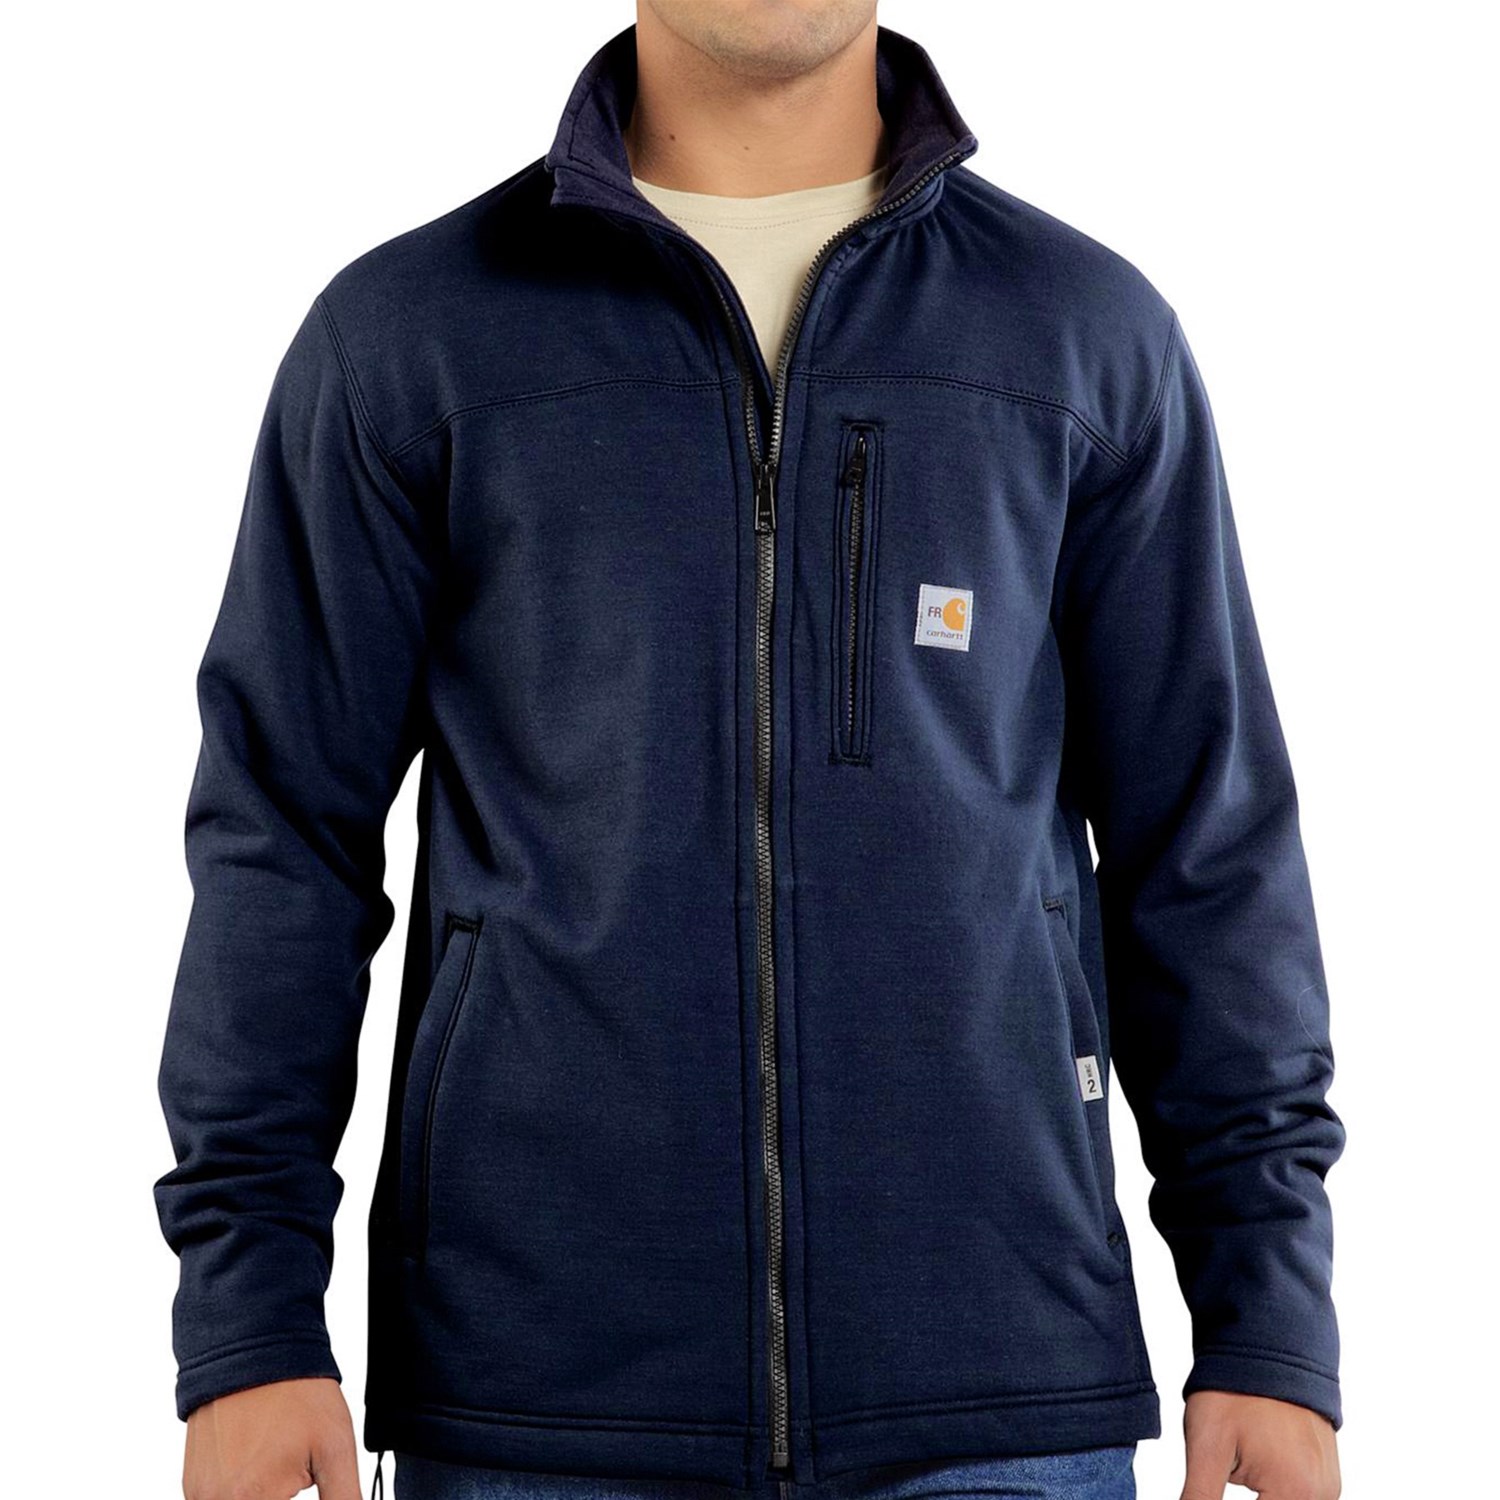 Carhartt Flame-Resistant Portage Jacket (For Big and Tall Men)